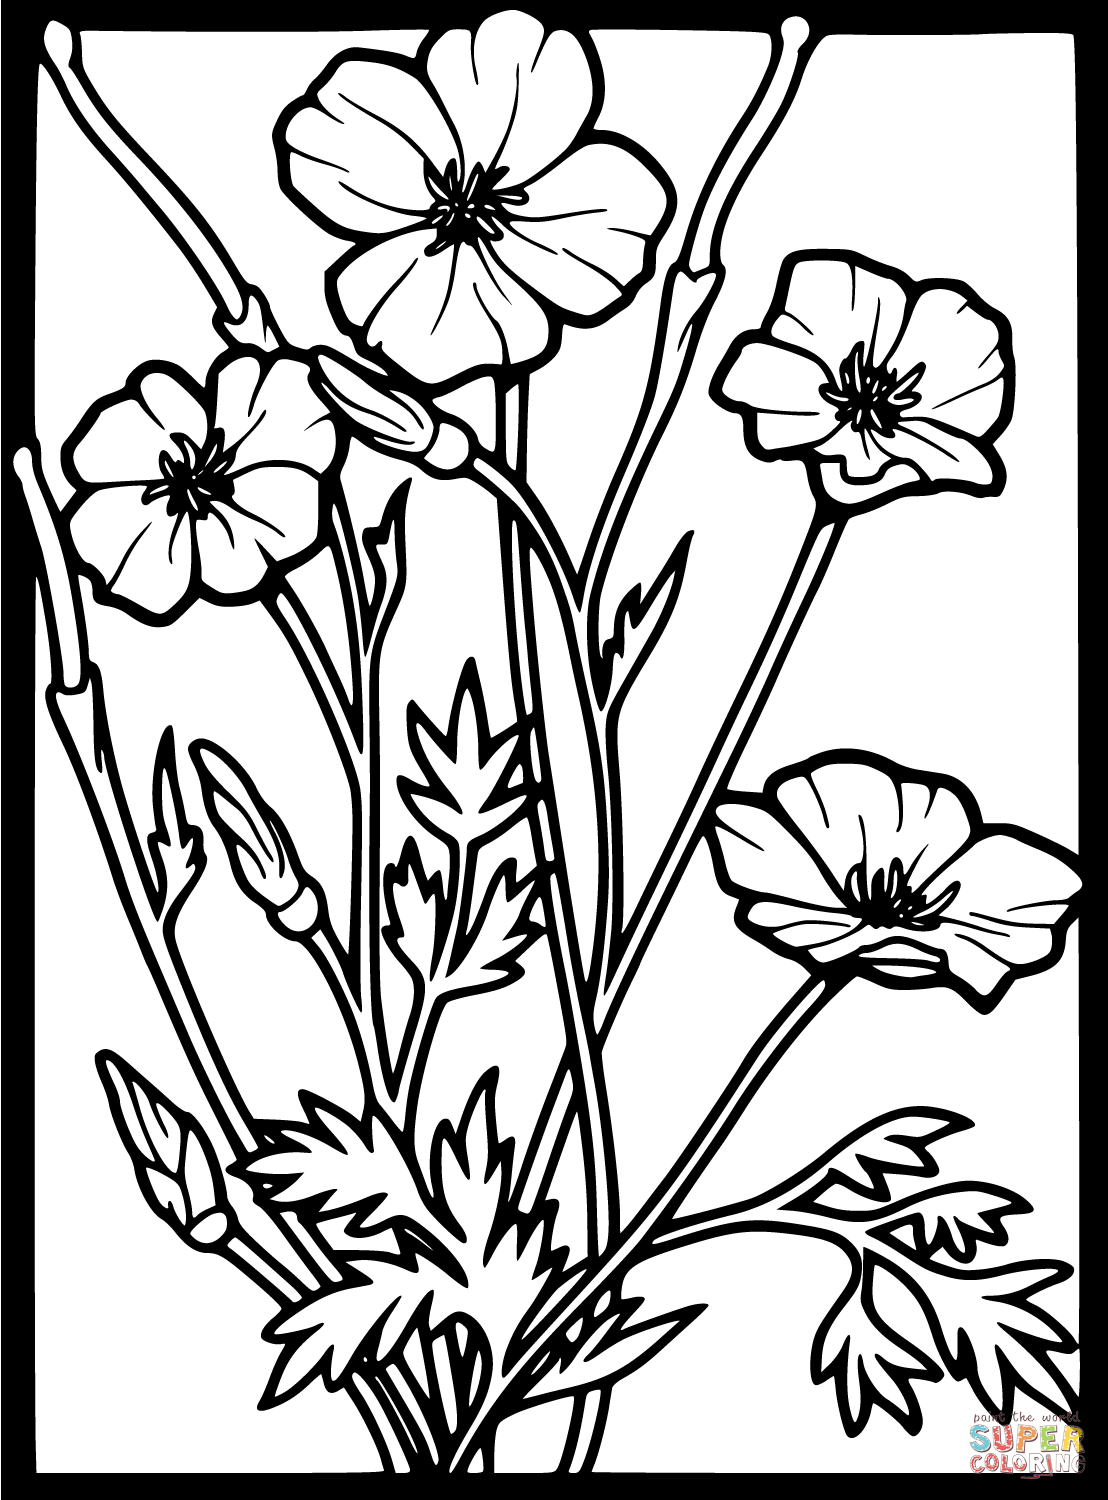 Poppy Coloring Pages For Kids - Coloring Home